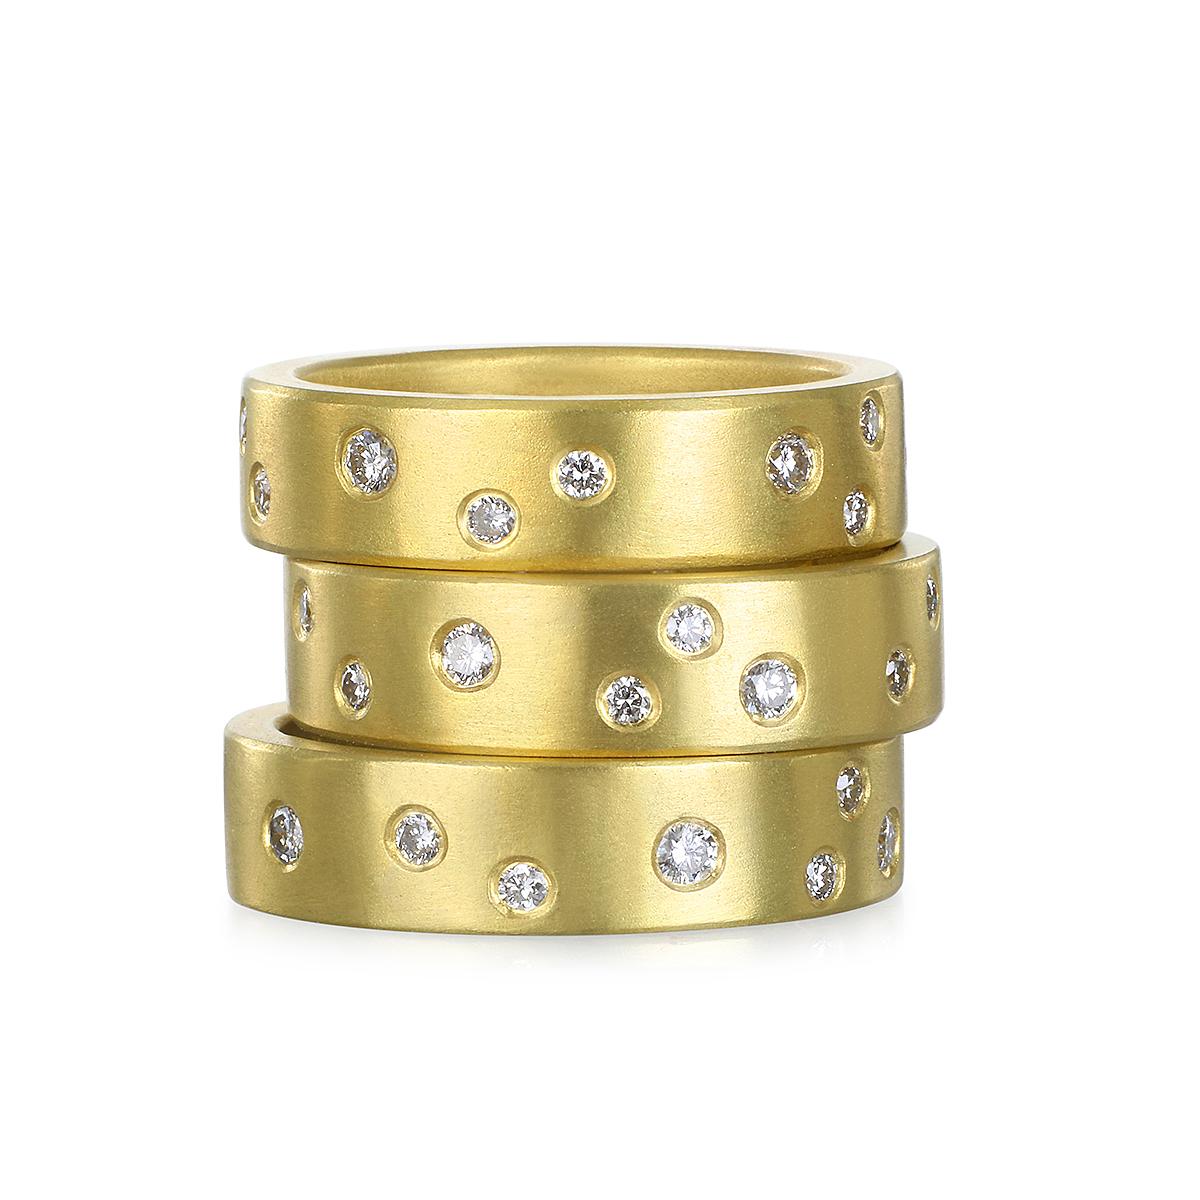 Crafted from solid 18 Karat Gold, Faye Kim's Diamond Burnished Band Ring sparkles with the brilliance of the night sky. This versatile ring can be worn alone, as a wedding band, or stacked with other rings for a fresh, modern look.

Diamonds .40